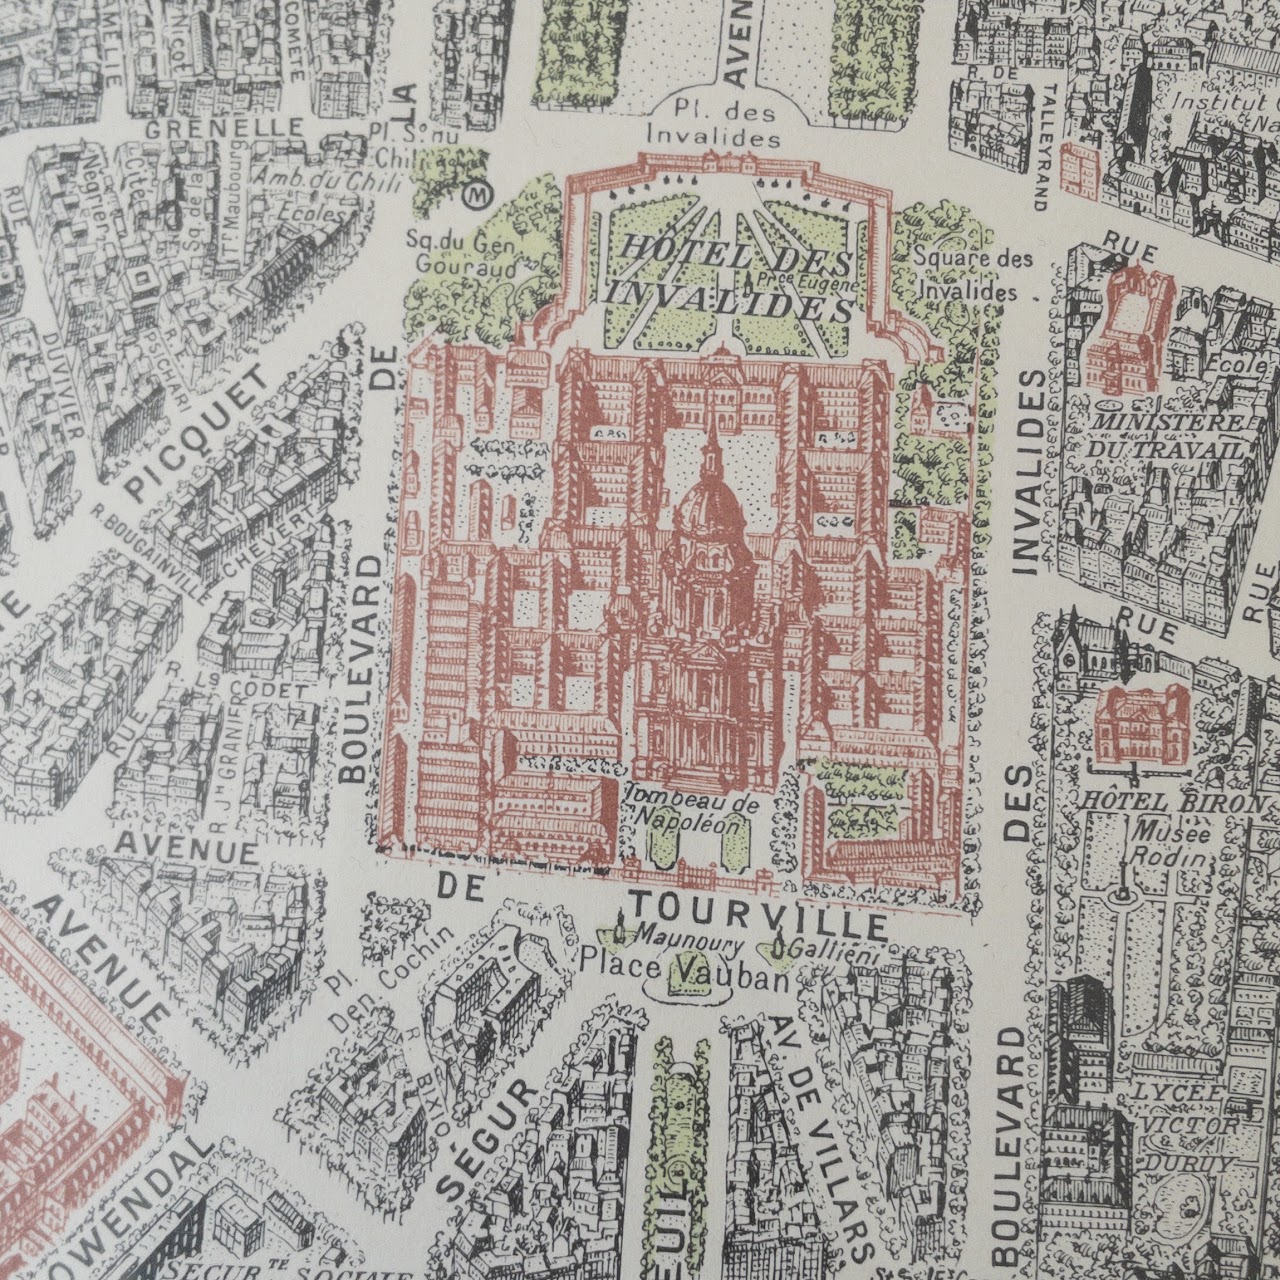 View of the Center of Paris' Mid-Century Aerial View Lithograph Map